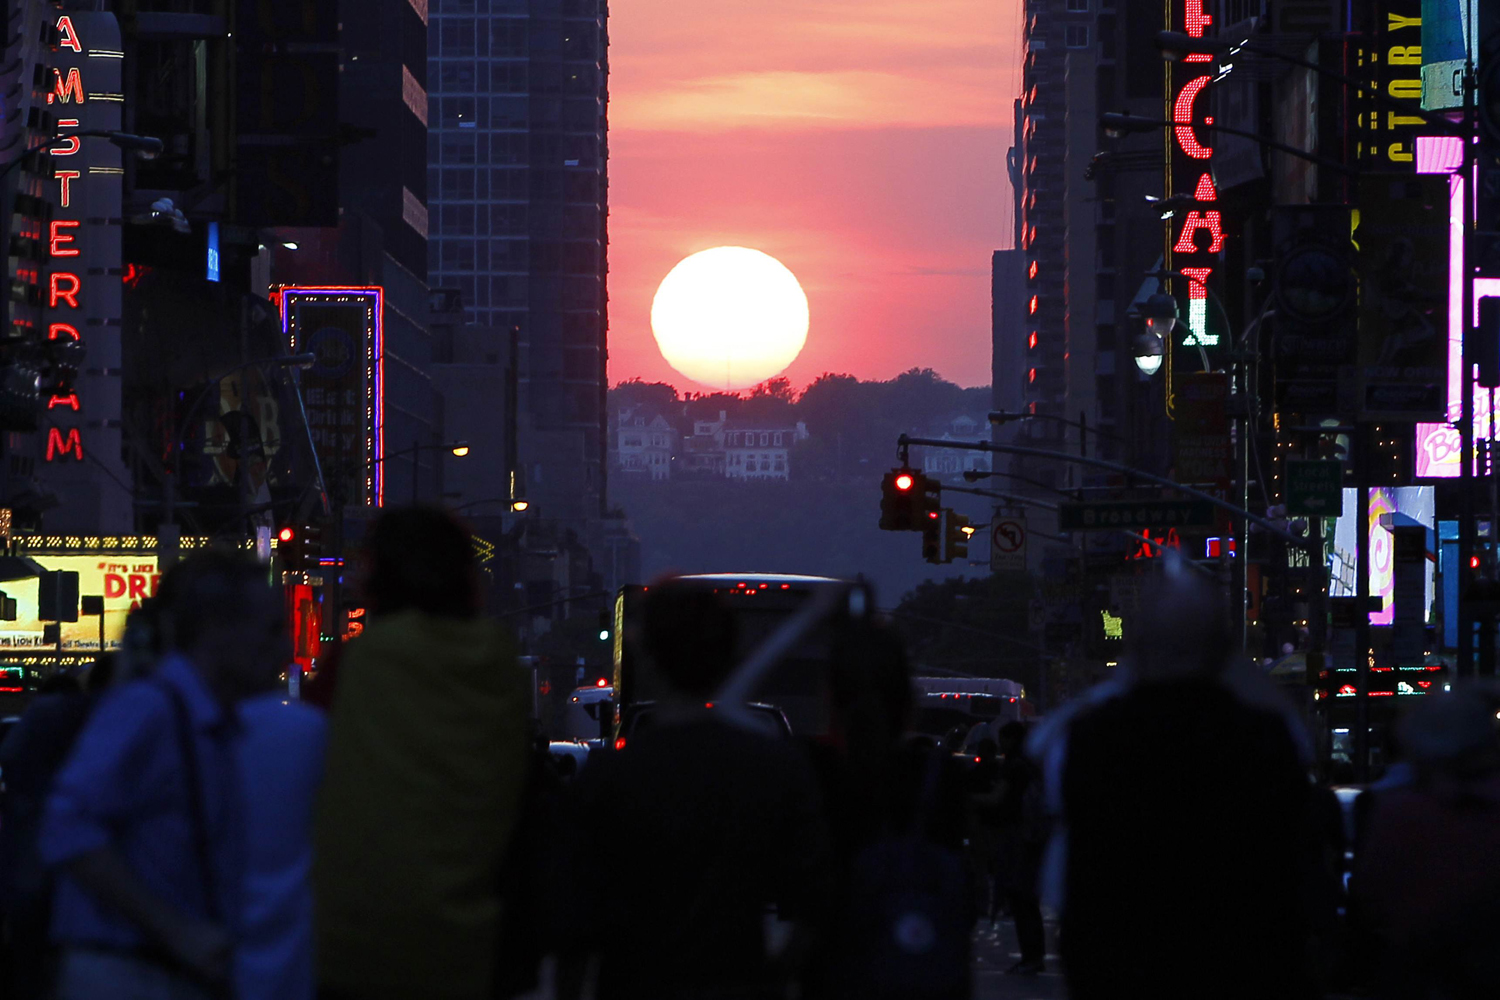 May 29, 2013. The sun shines down 42nd Street at sunset during the biannual occurrence named  Manhattanhenge  in New York, when the setting sun aligns itself with the city's street grid.